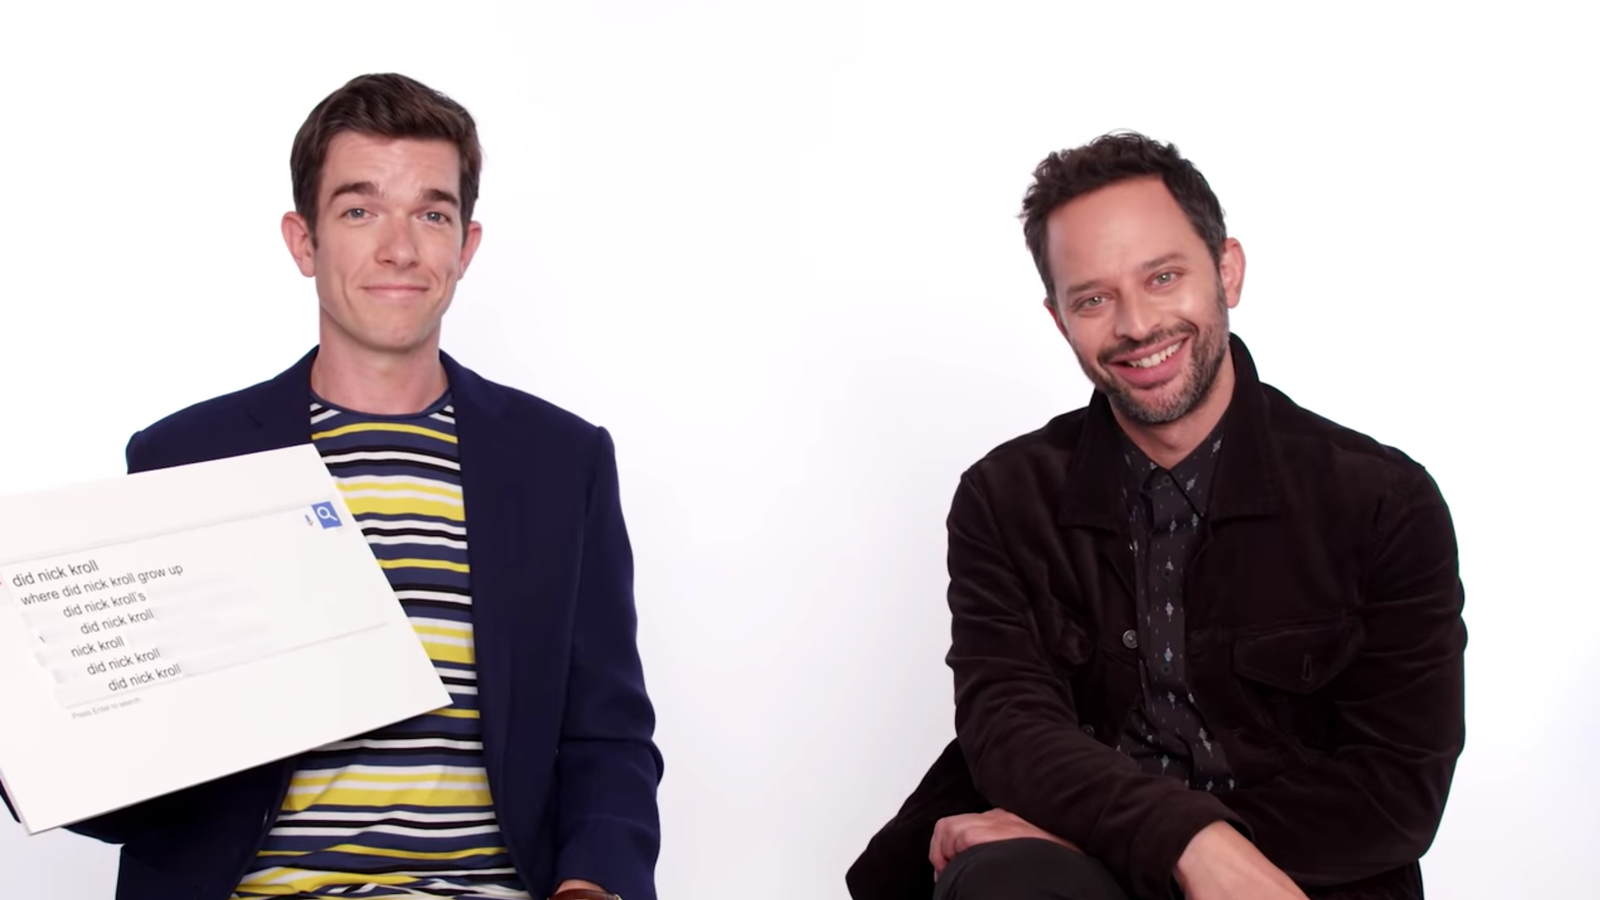 Congratulations You Ve Earned A 5 Minute Video Of John Mulaney And Nick Kroll Being Funny Together